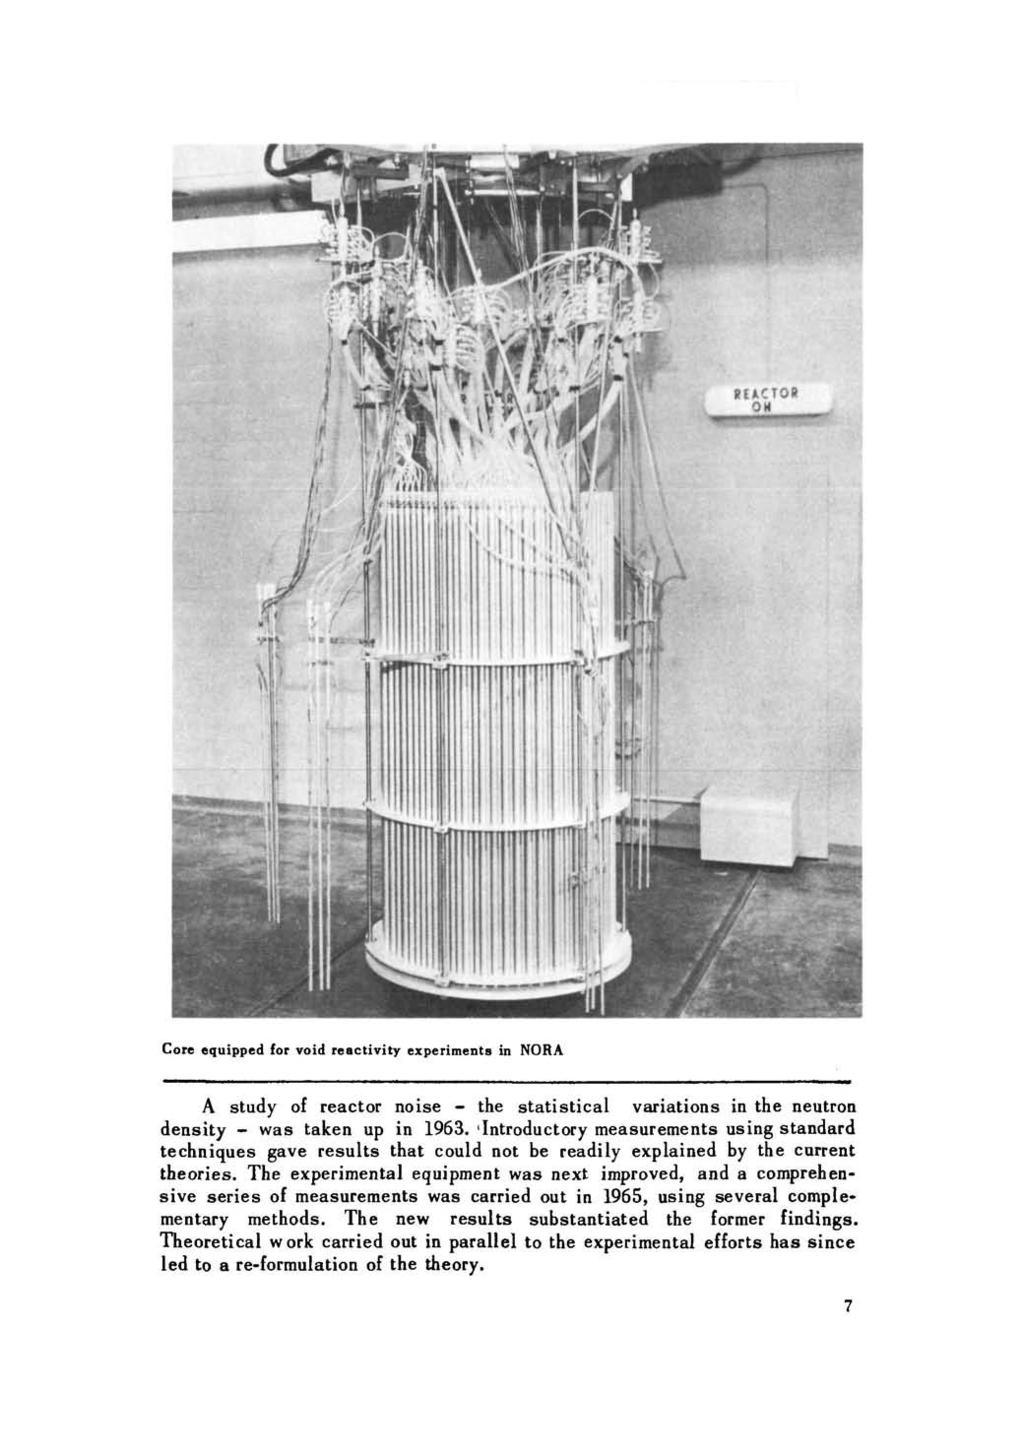 Core equipped for void reactivity experiments in NORA A study of reactor noise - the statistical variations in the neutron density - was taken up in 1963.